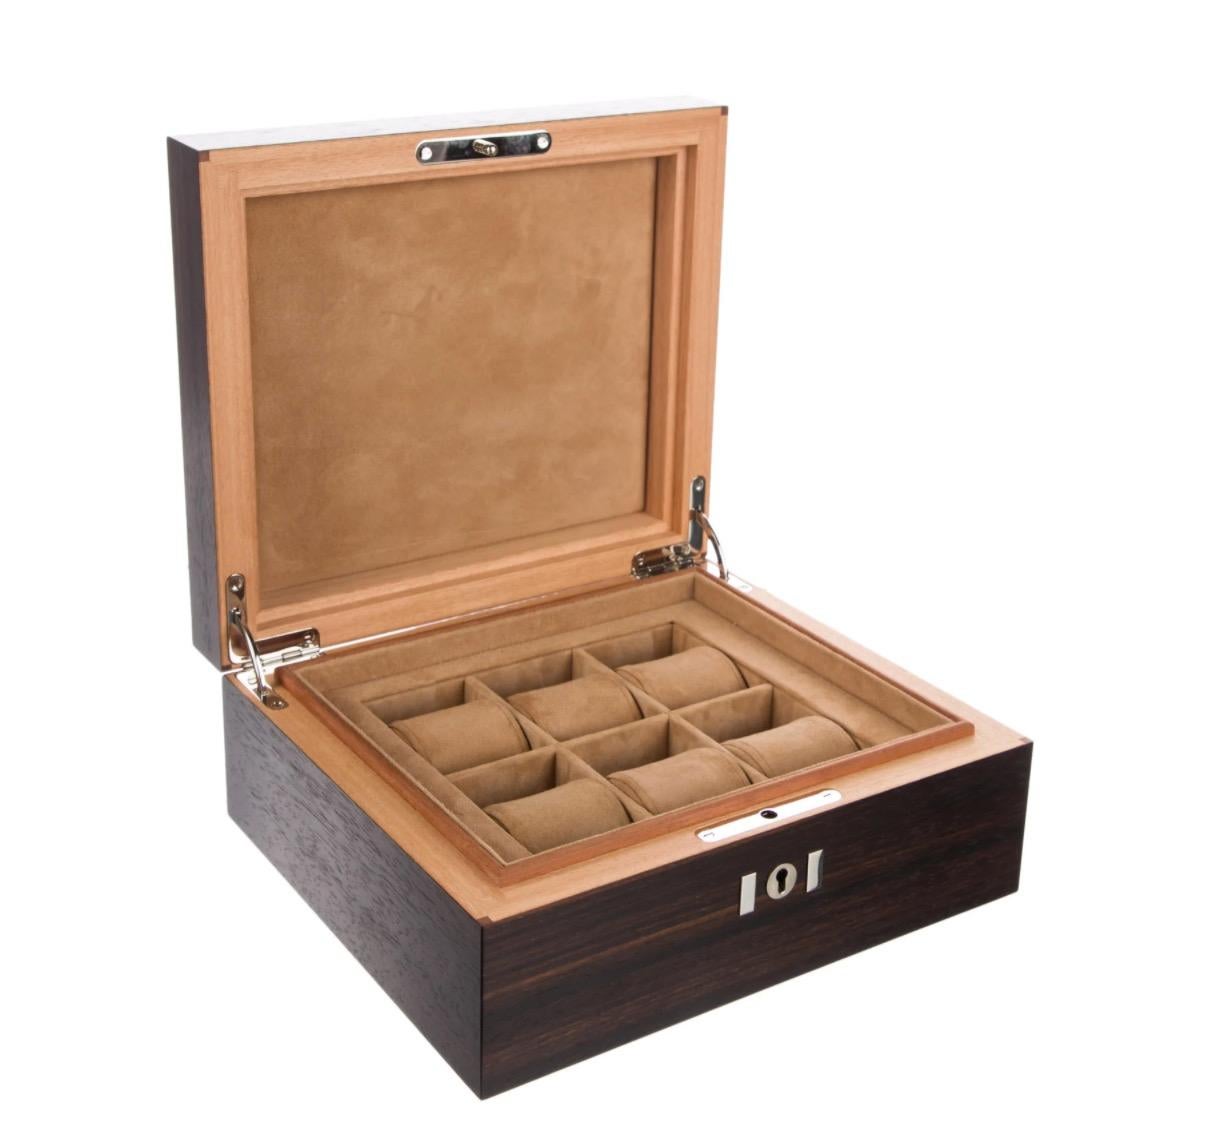 Wood 
Suede interior
Made in France
Lock and key closure
Features 6 watch rolls
Lock and key closure  
Measurements 9.5